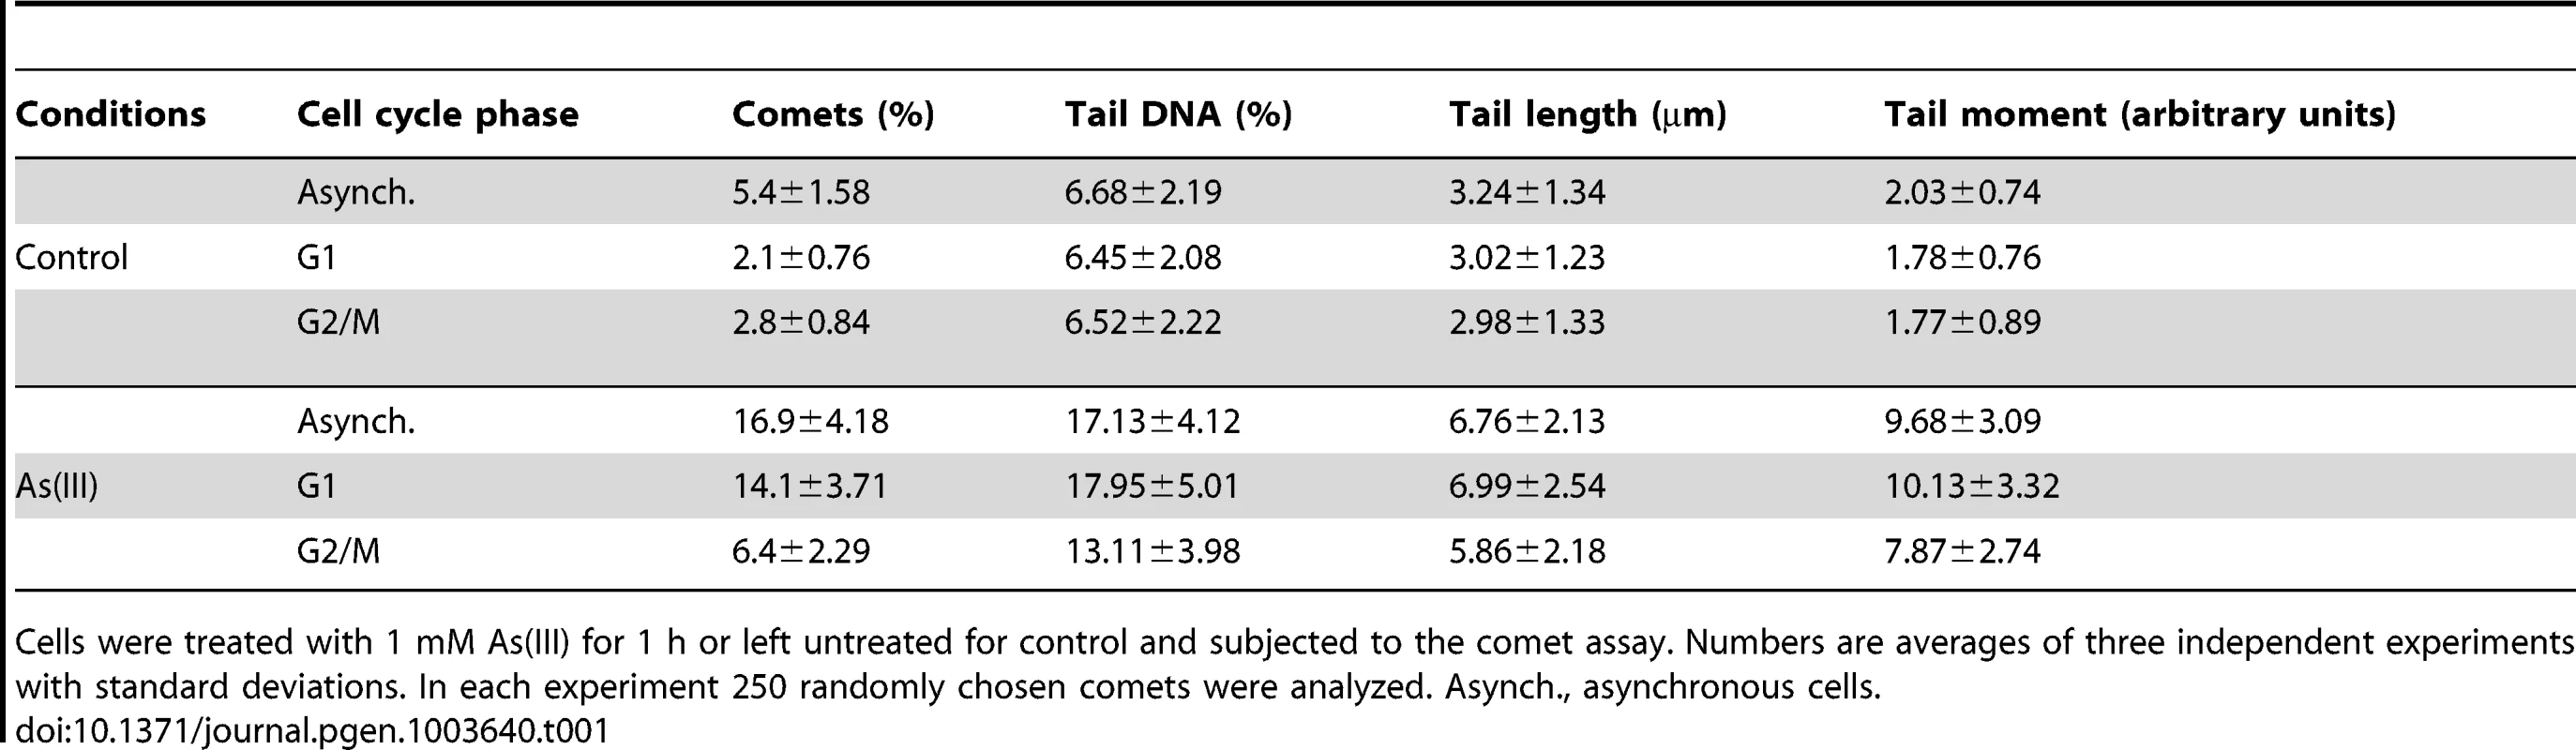 Analysis of As(III)-induced DNA damage by the comet assay.